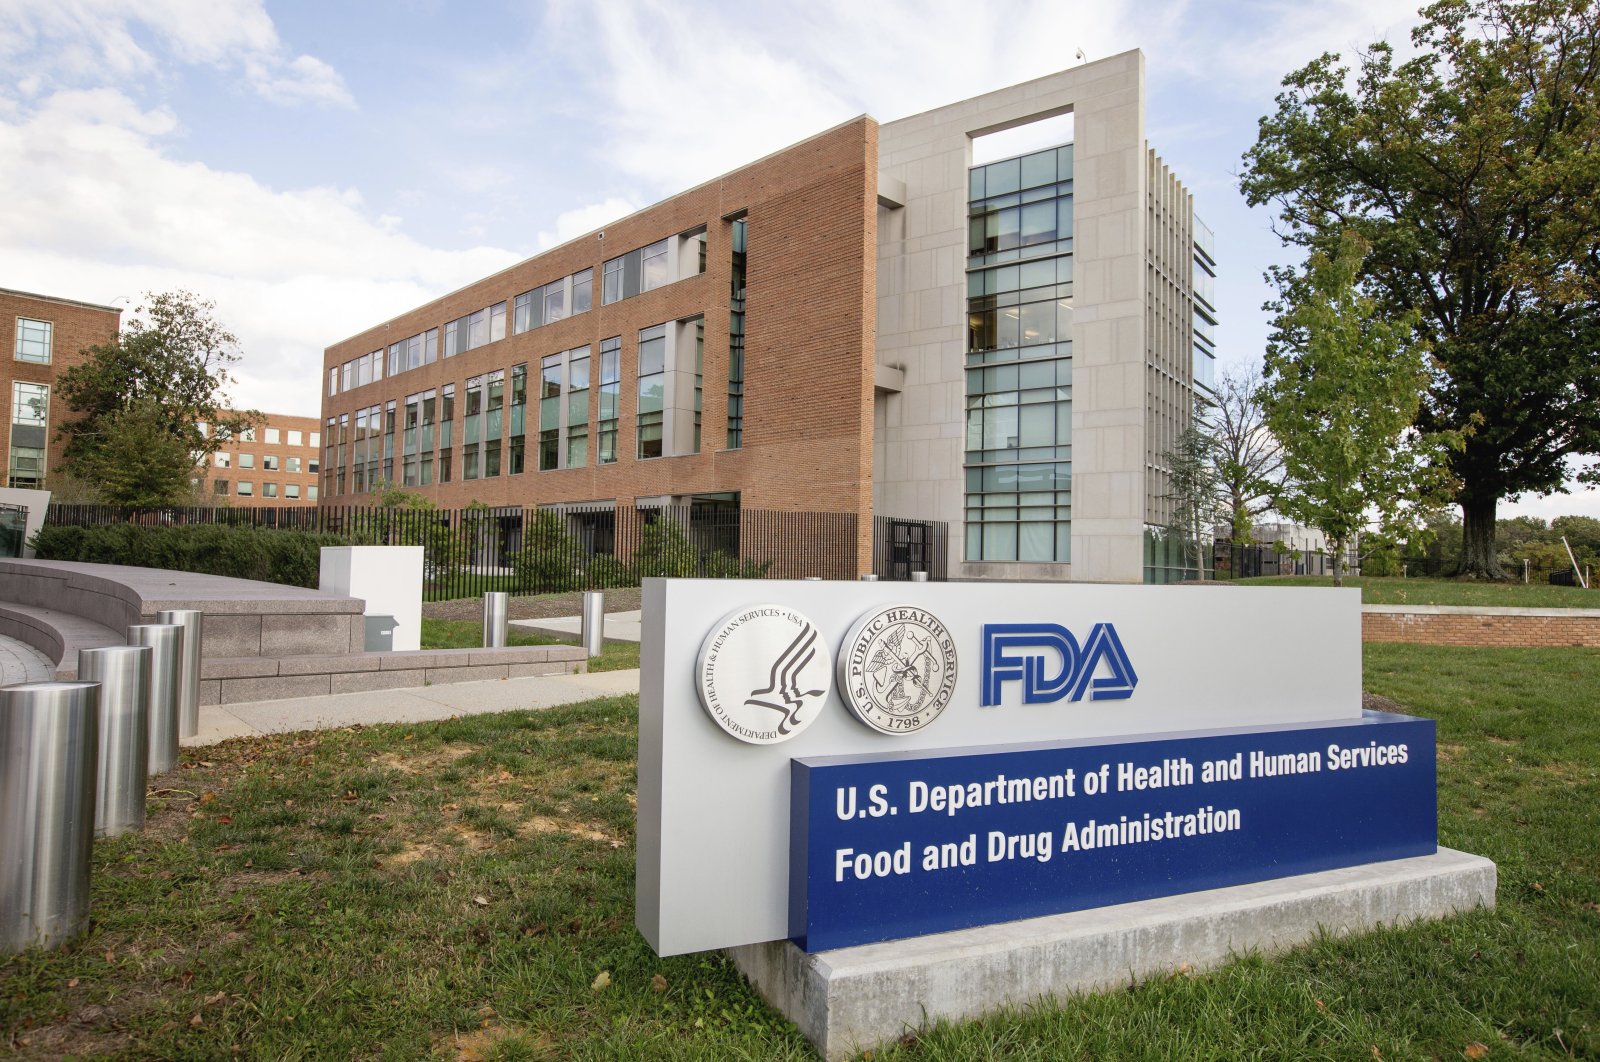 The Food and Drug Administration campus in Silver Spring, Maryland, US, Oct. 14, 2015. (AP Photo)